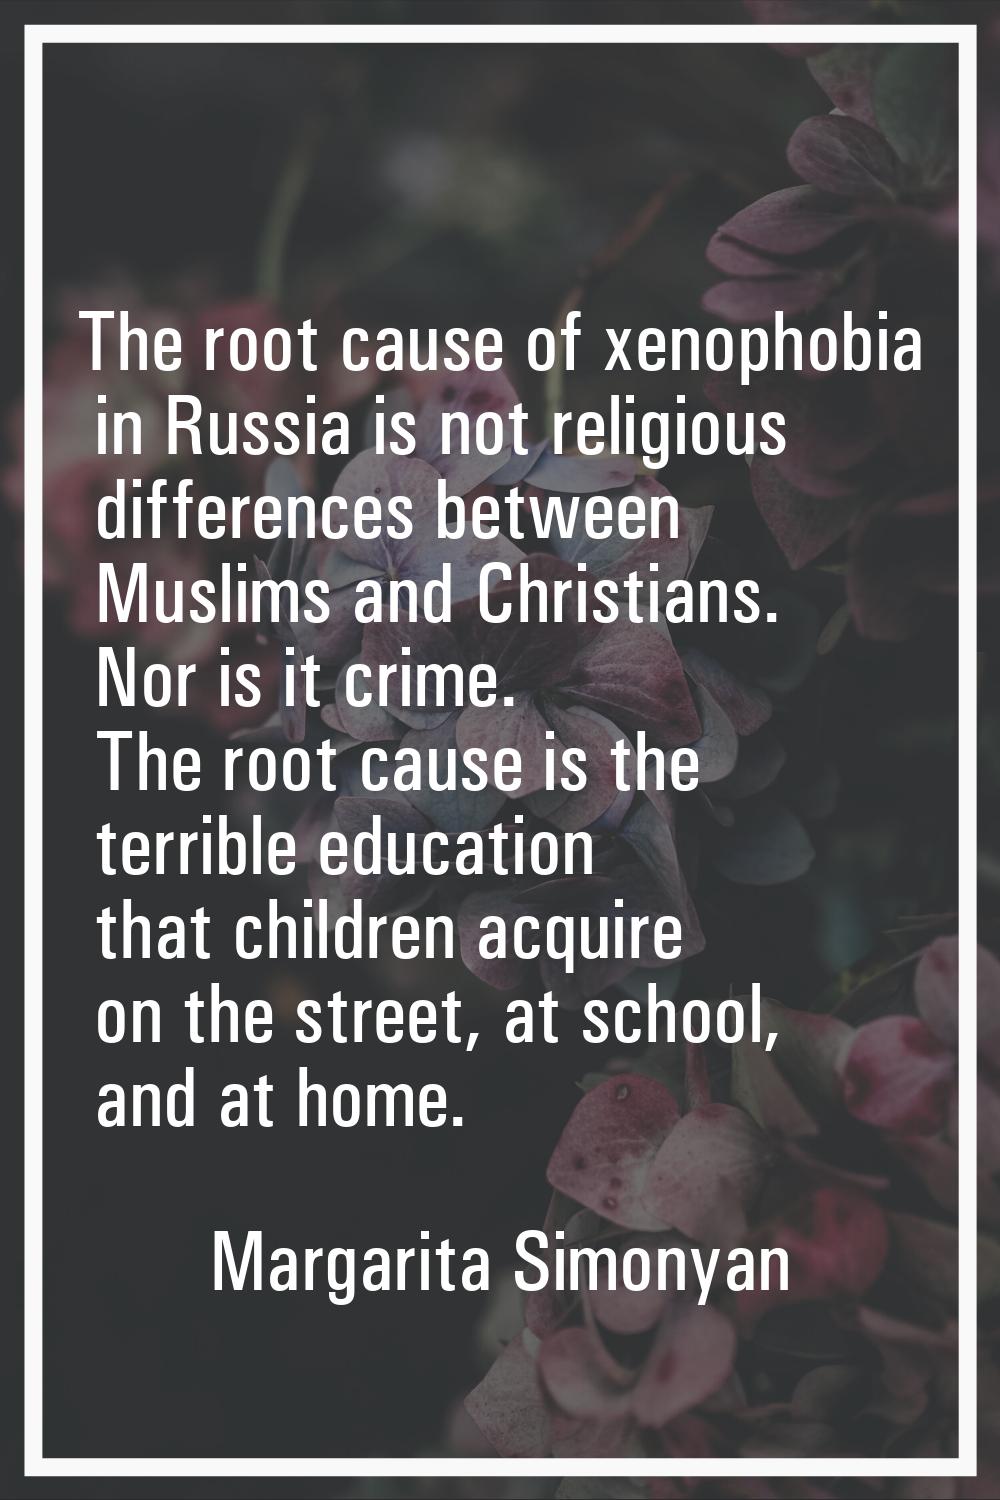 The root cause of xenophobia in Russia is not religious differences between Muslims and Christians.